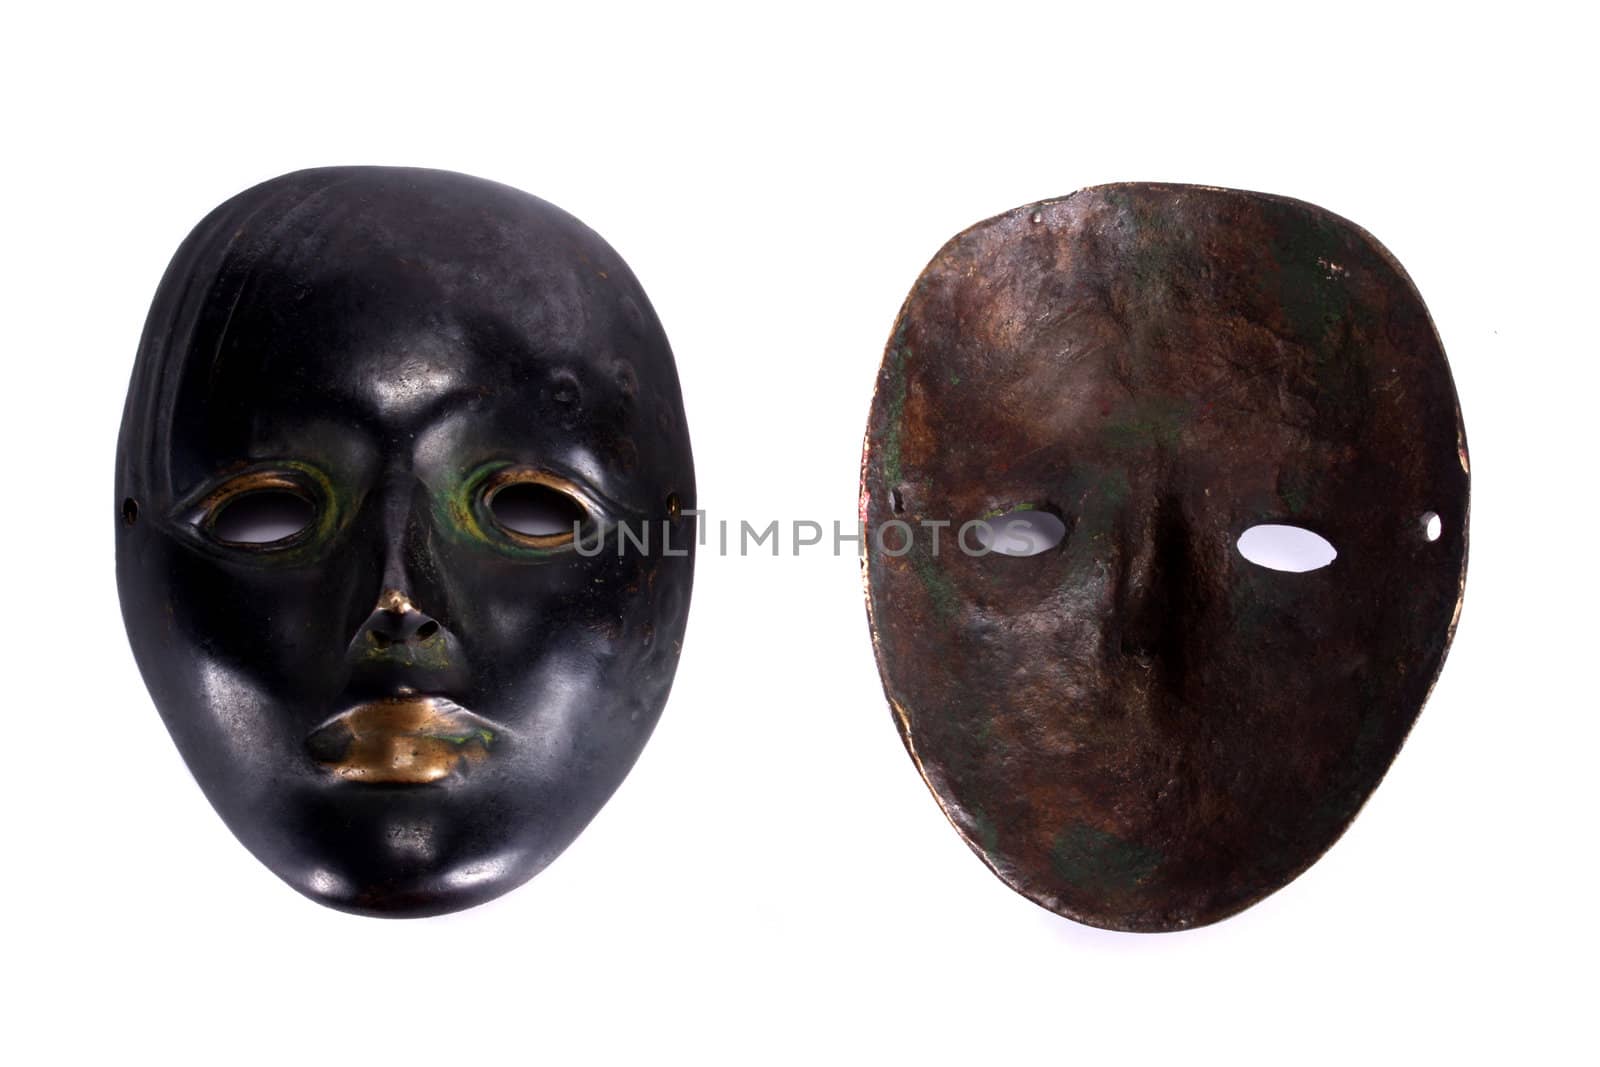 Both sides of the mask showing its front artistic face and the rusty backside.